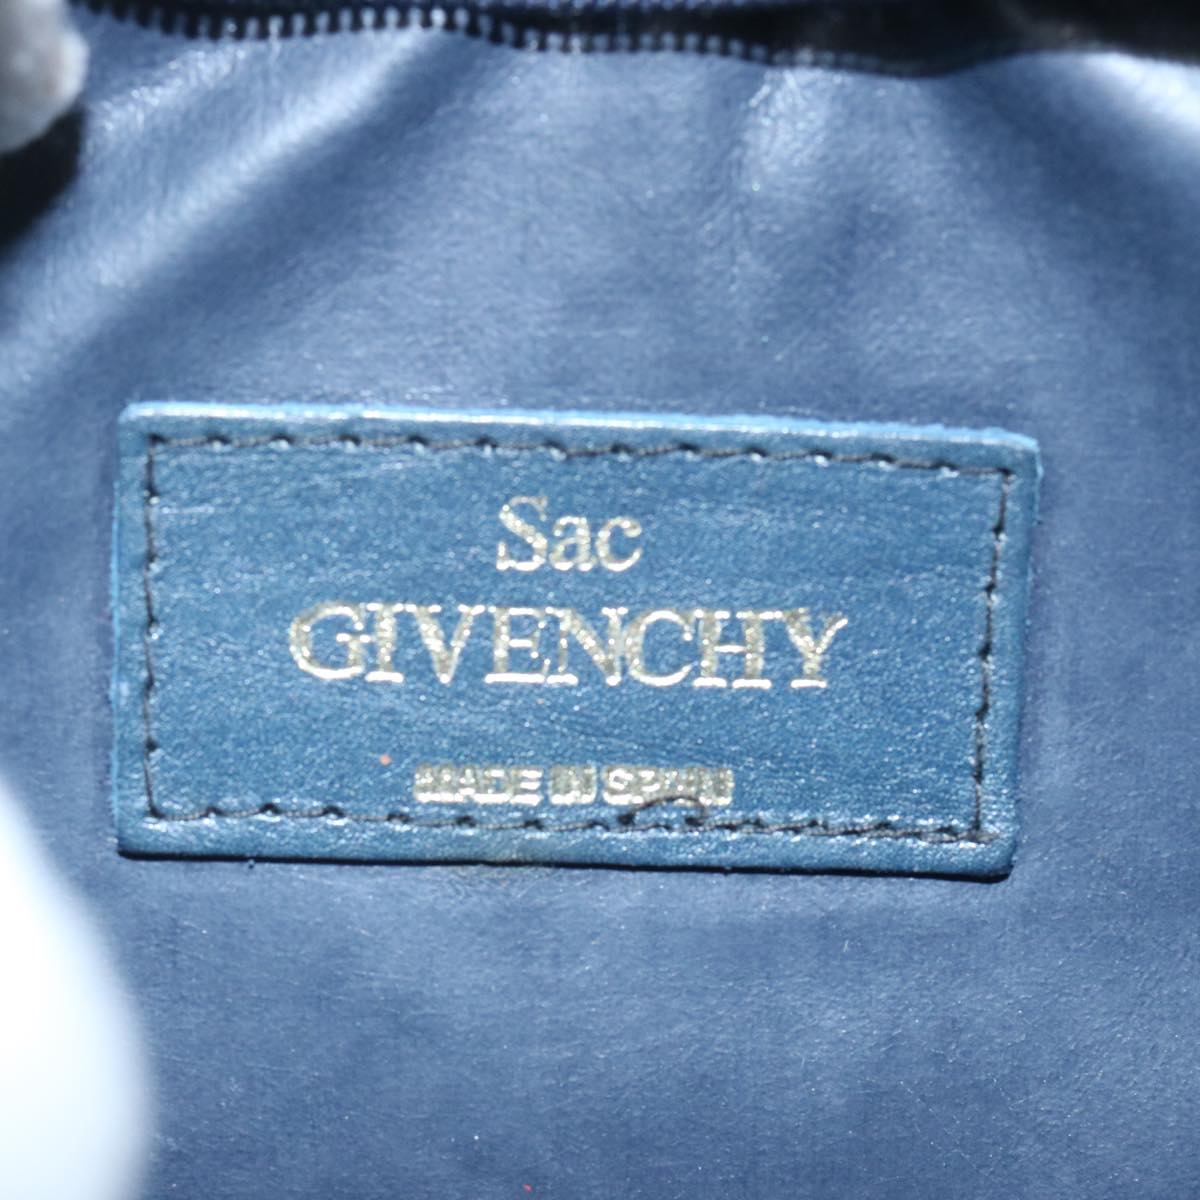 GIVENCHY Shoulder Bag Leather Navy Auth bs11816